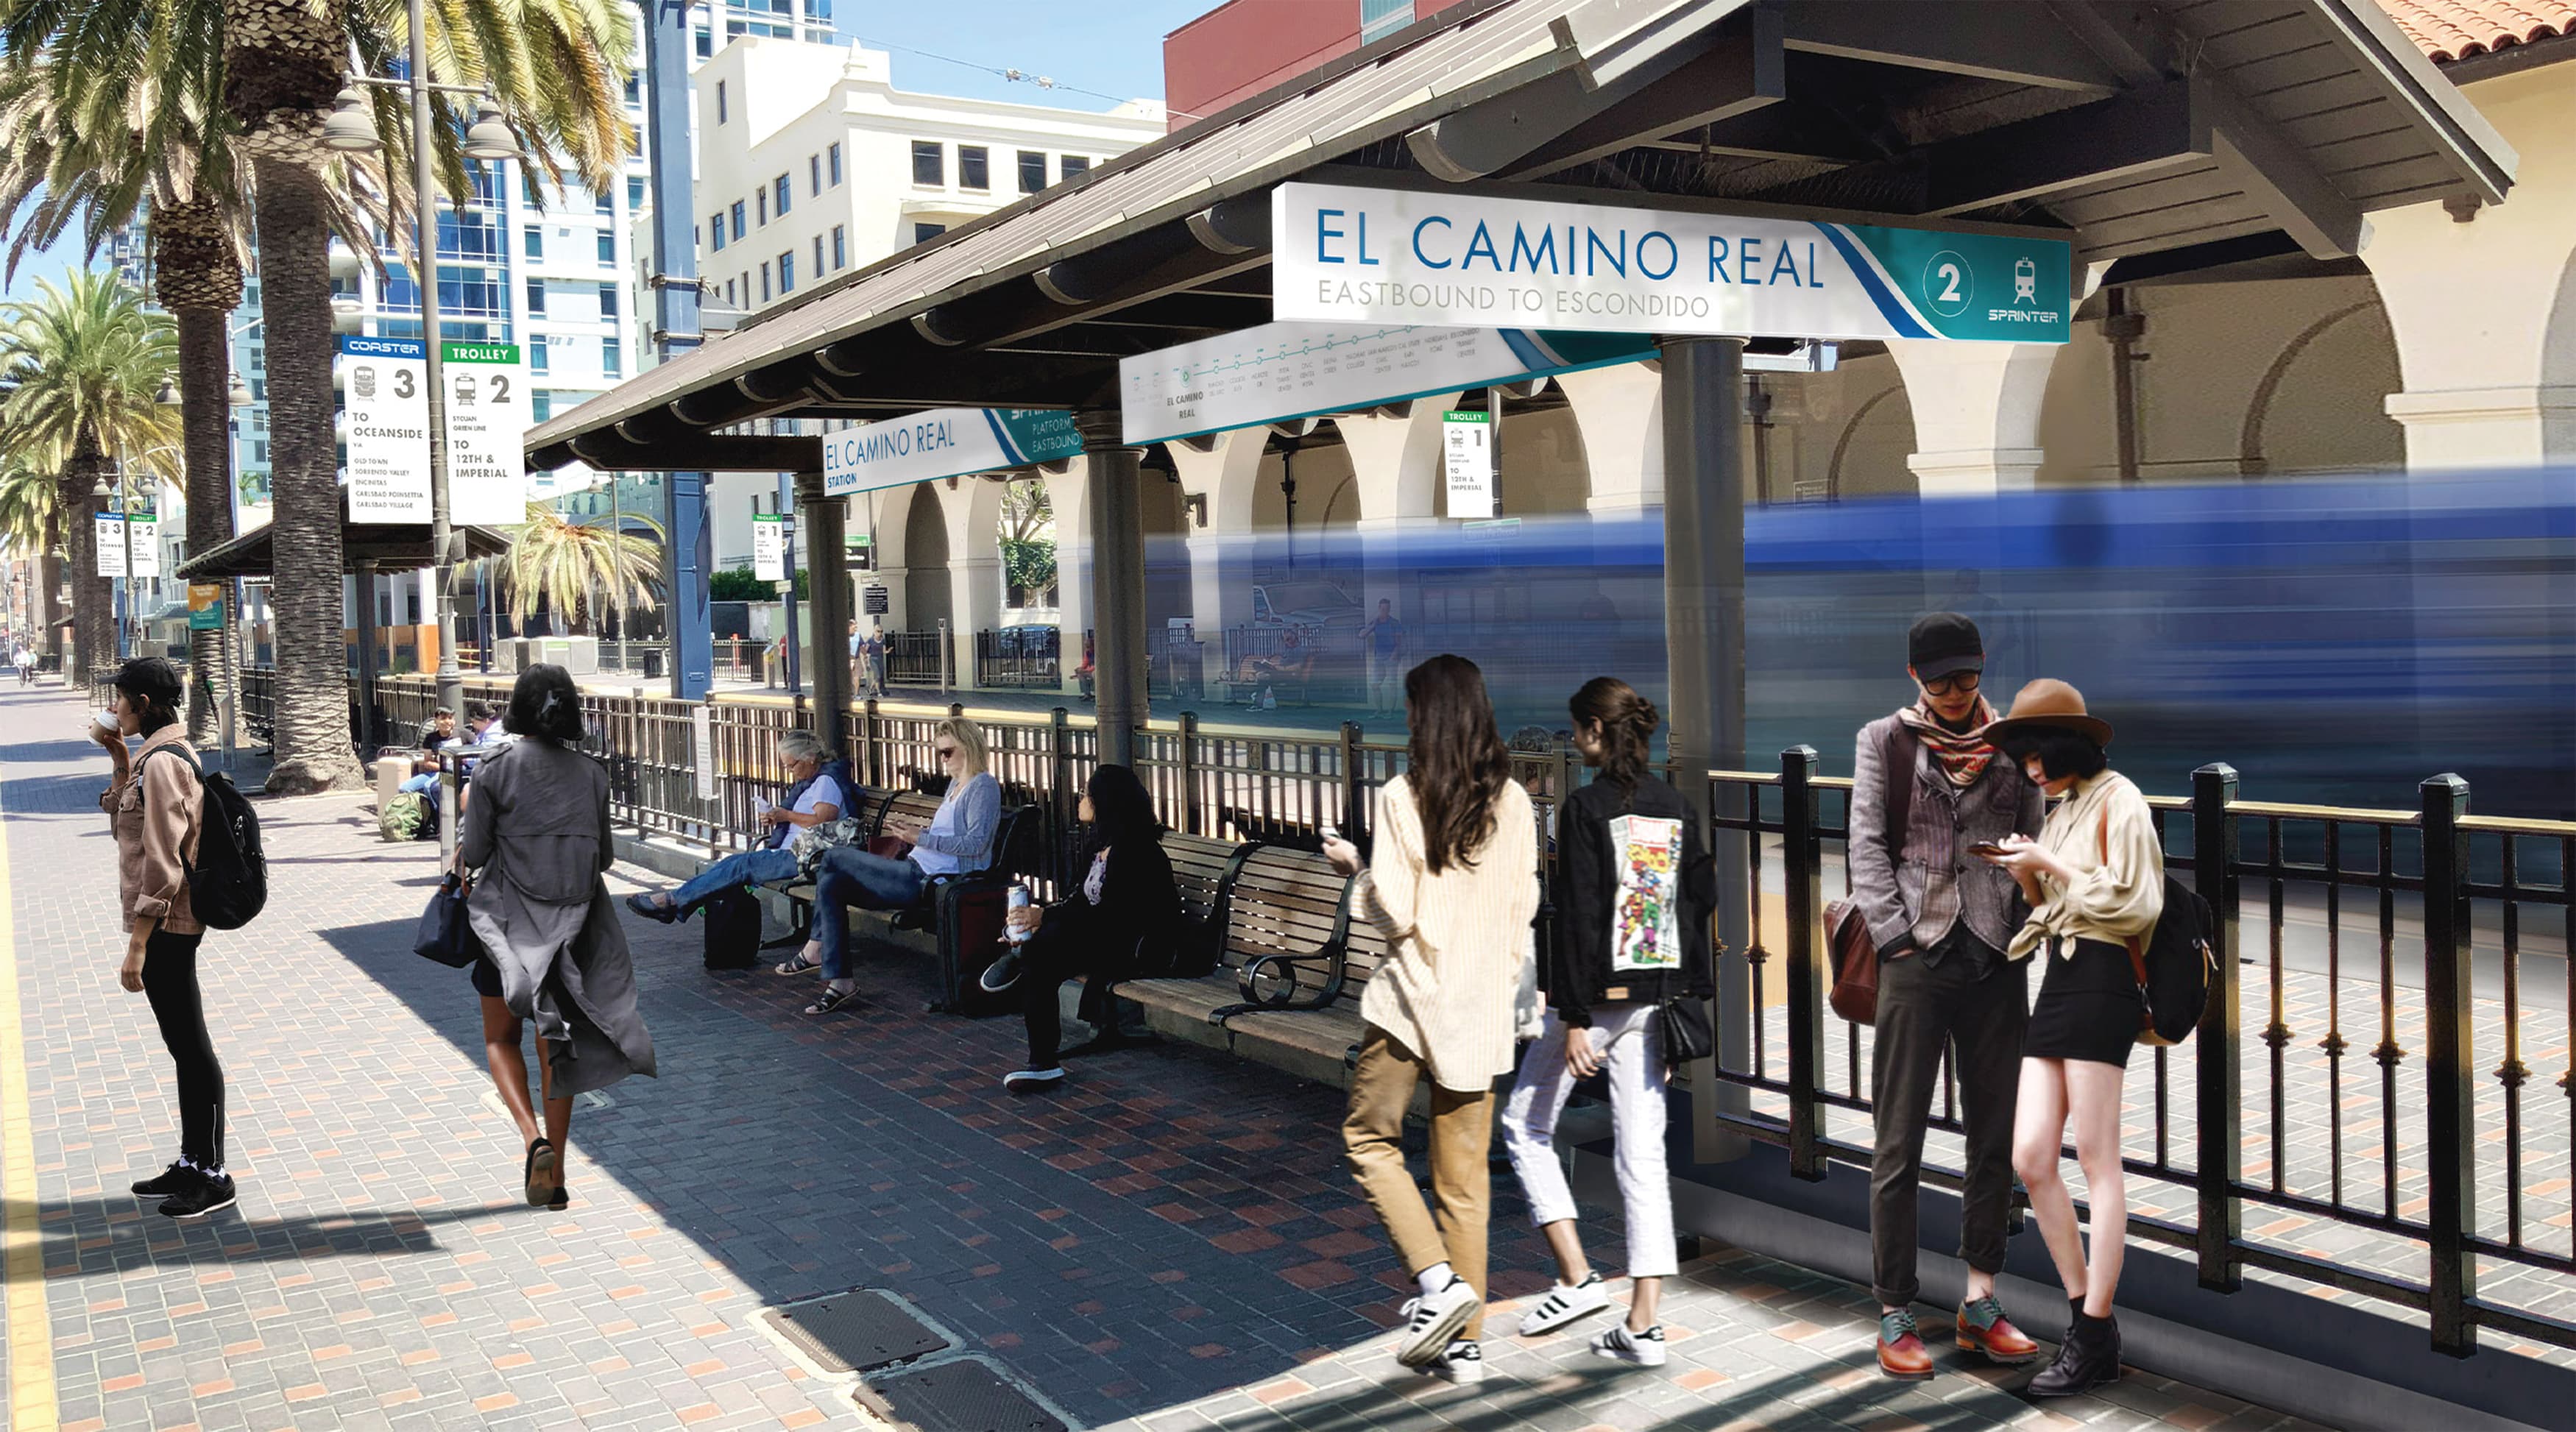 North County Transit District, the transit system in northern San Diego, California, worked with RSM Design to re-think what their transit system looks like. Transit identity design